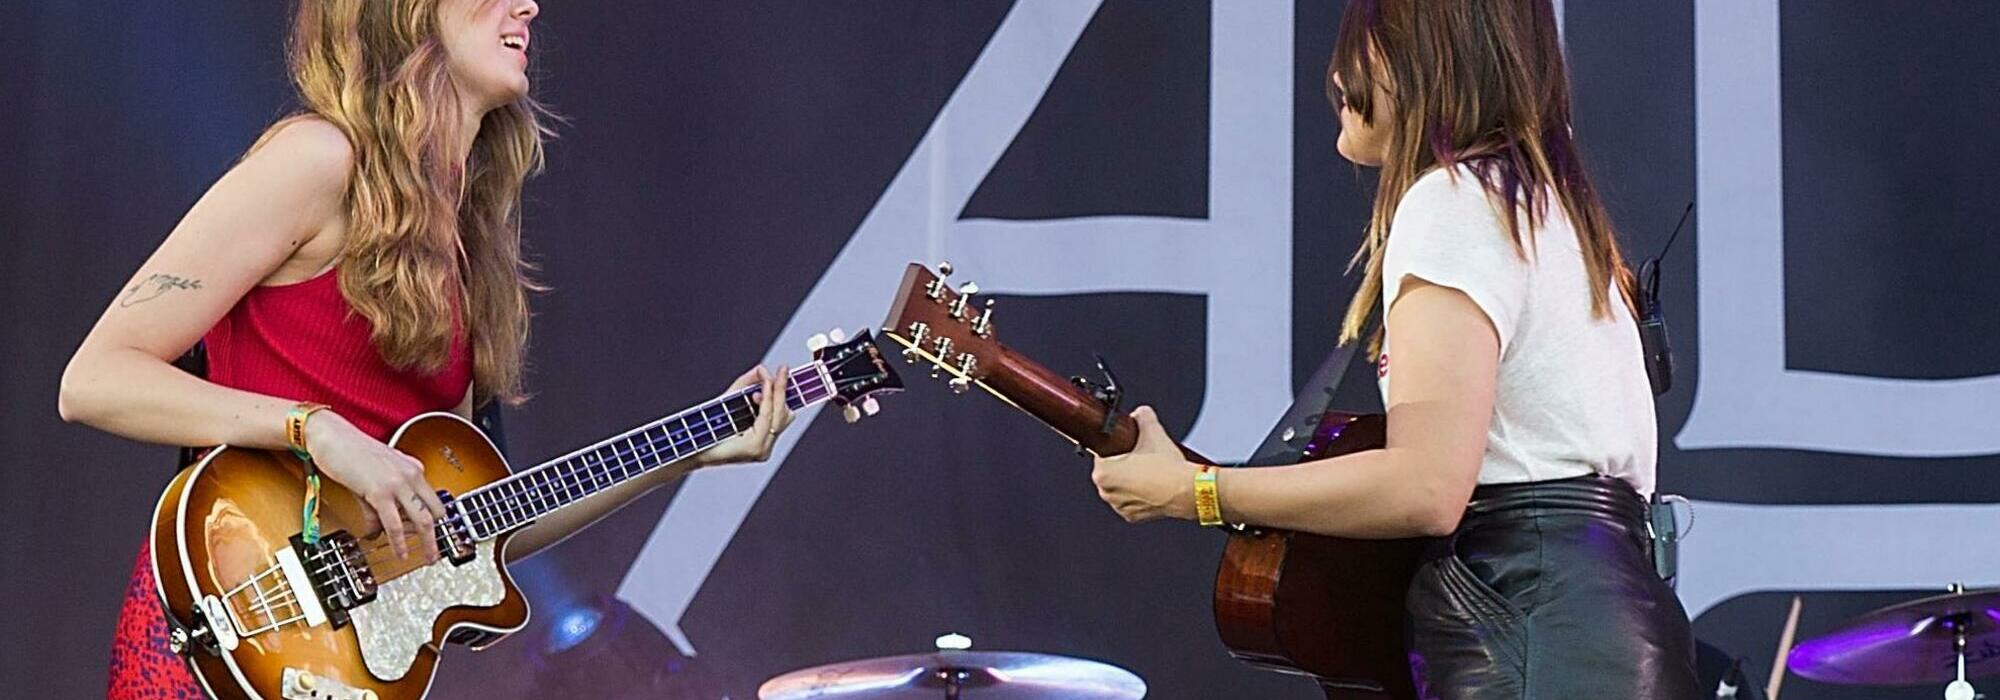 A First Aid Kit live event